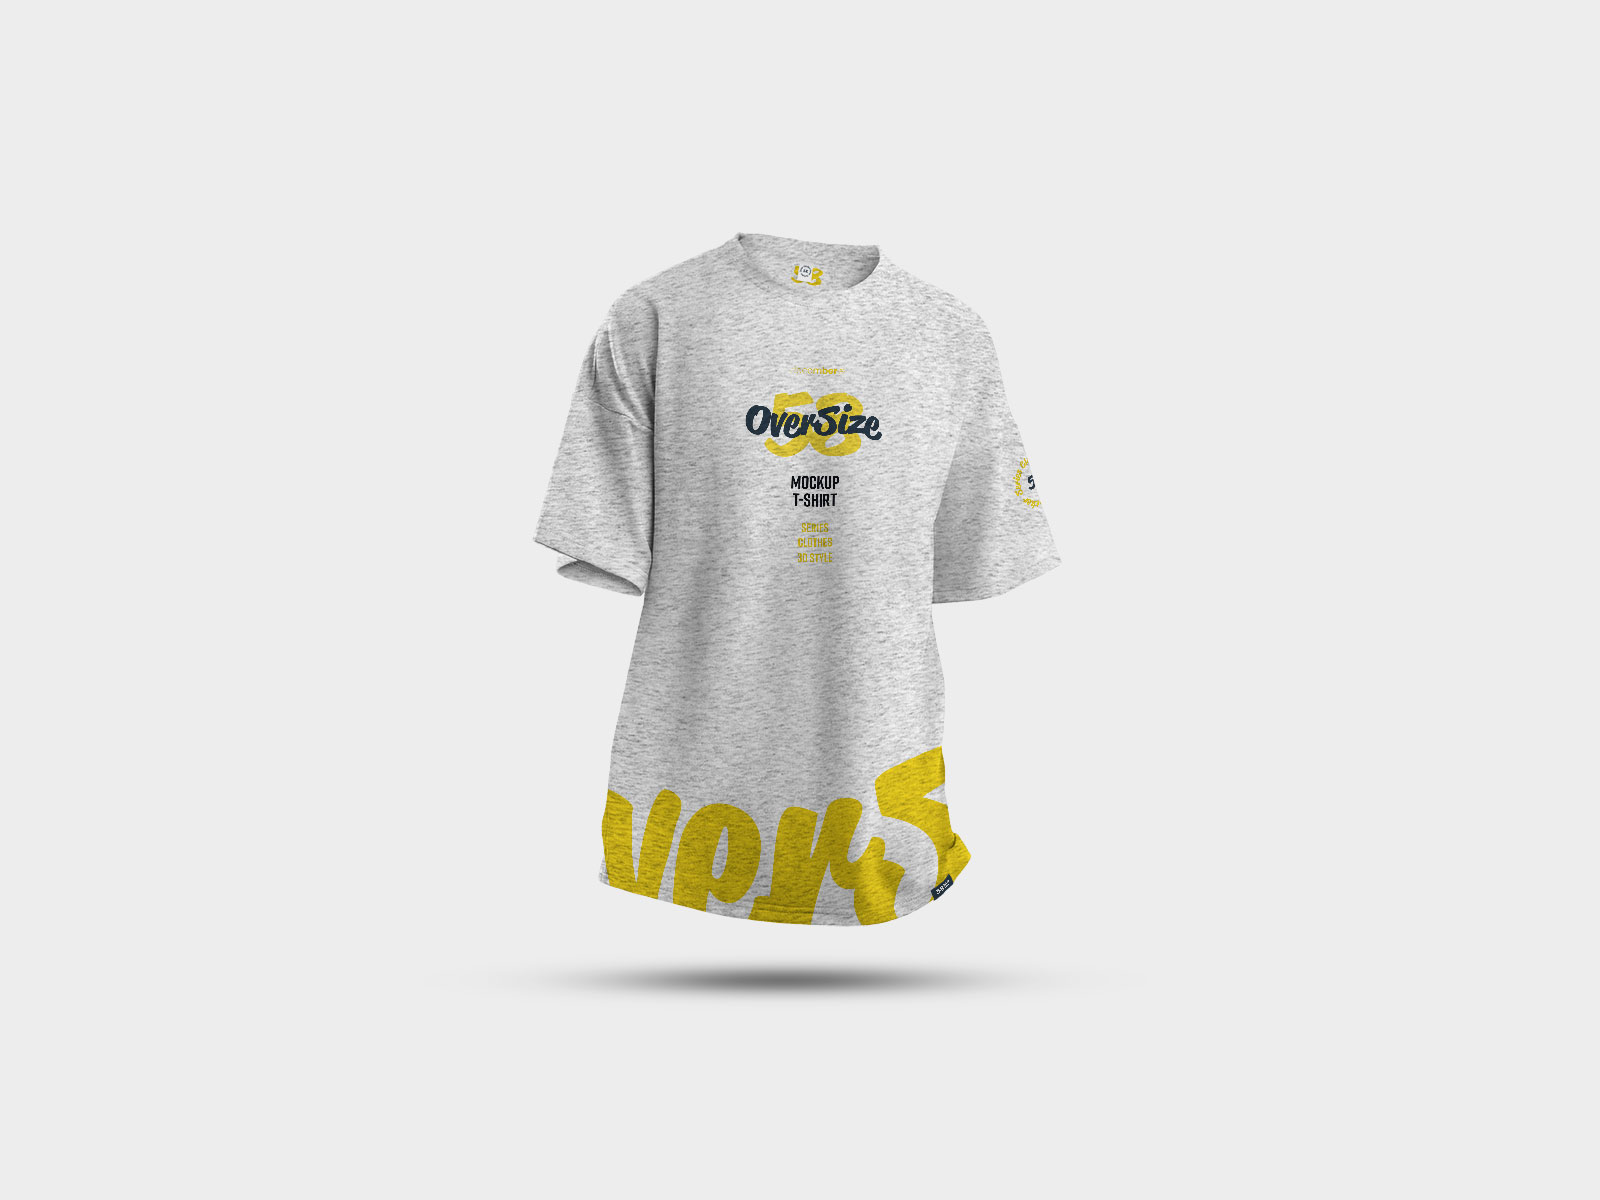 Oversize T-Shirt Mockup: Redefine Casual Comfort with Stylish Simplicity